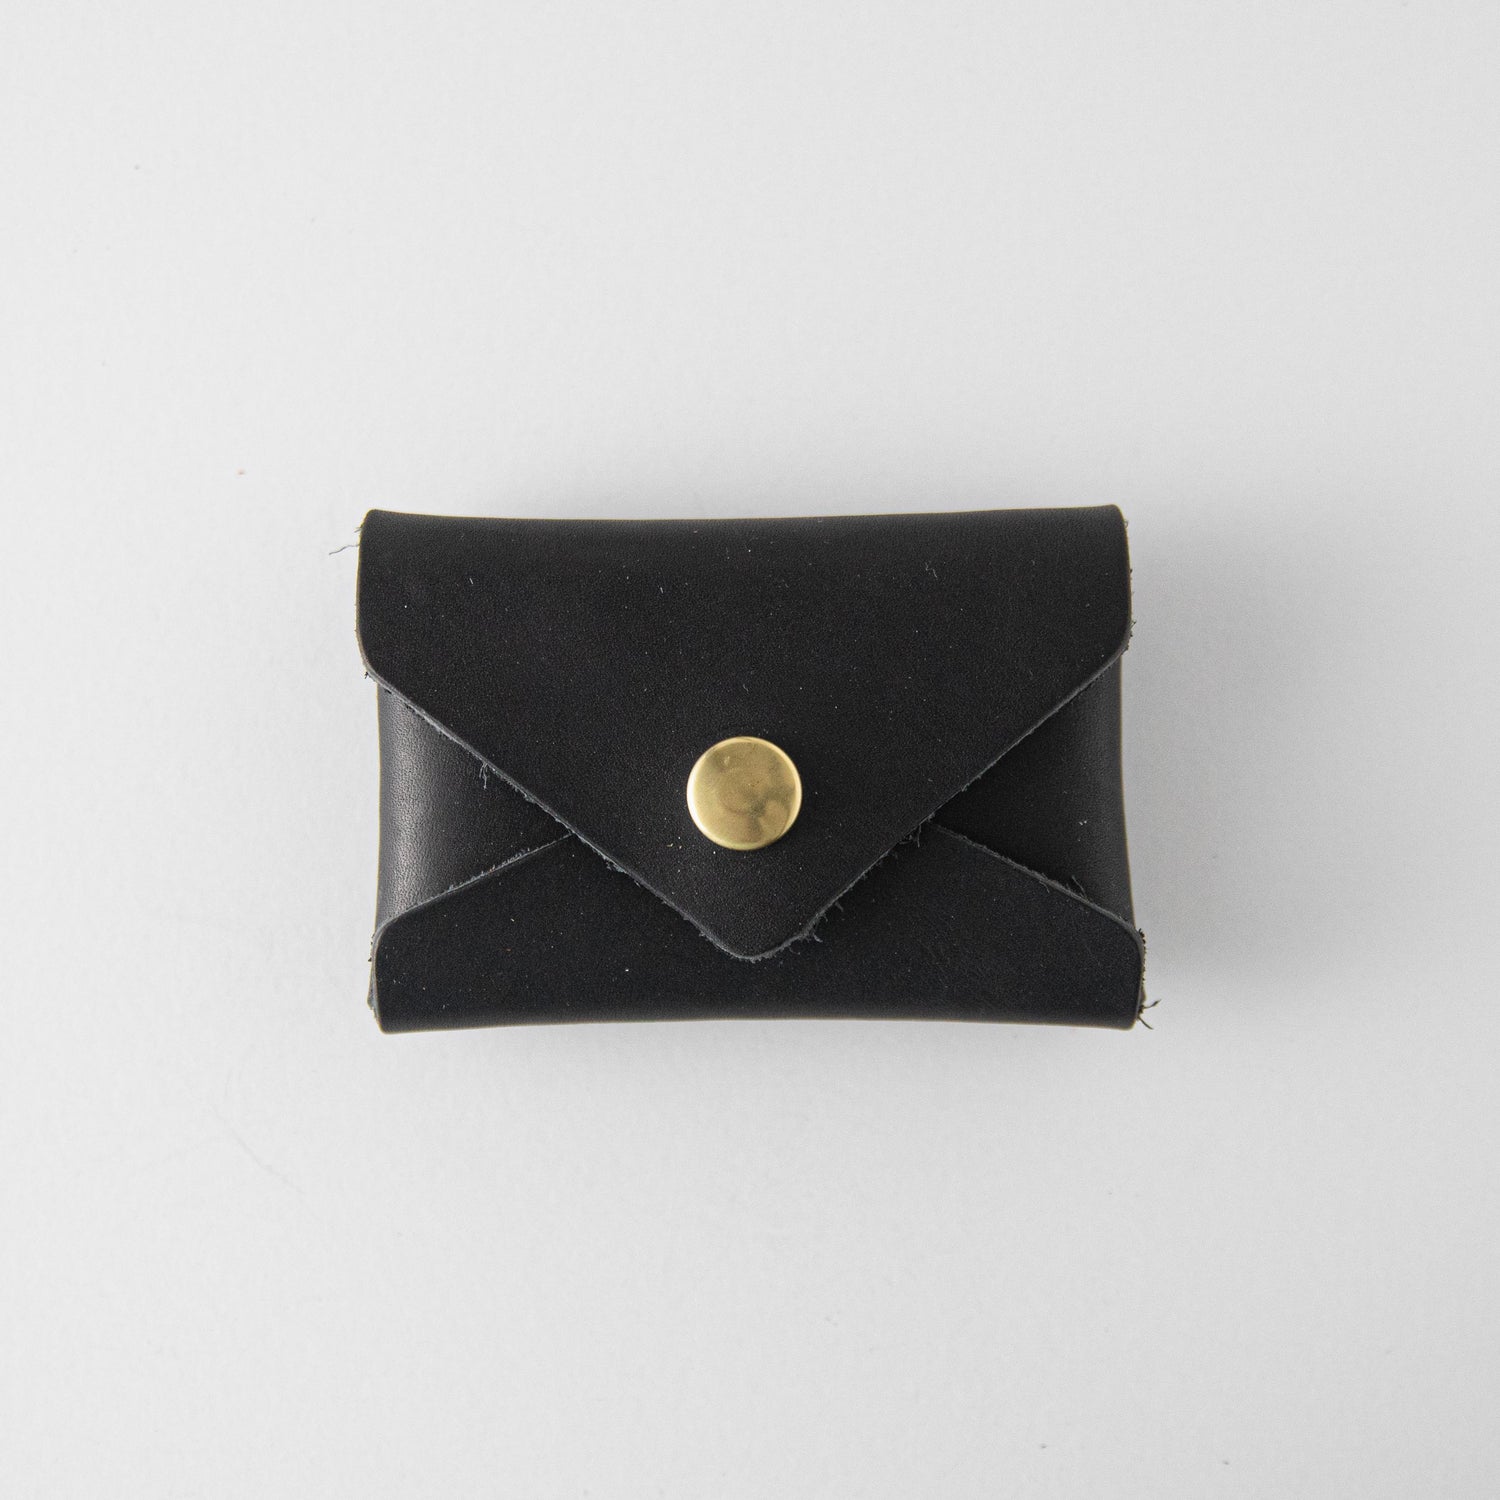 Black Slim Card Wallet | Leather Wallets Made in America at KMM & Co. No